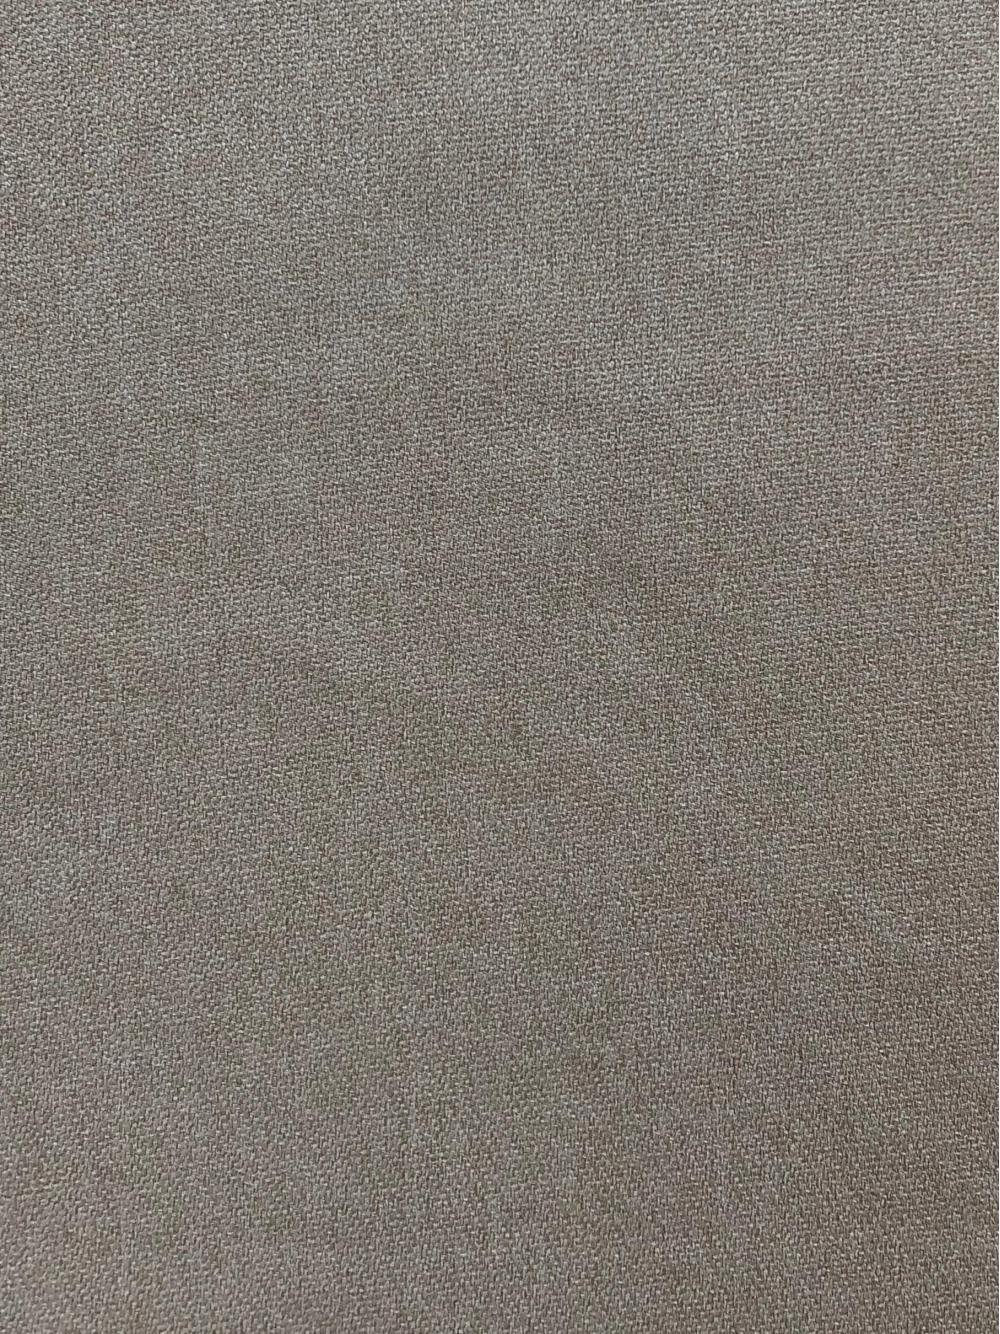 Super Soft Woven Material Types Liene Sofa Fabric